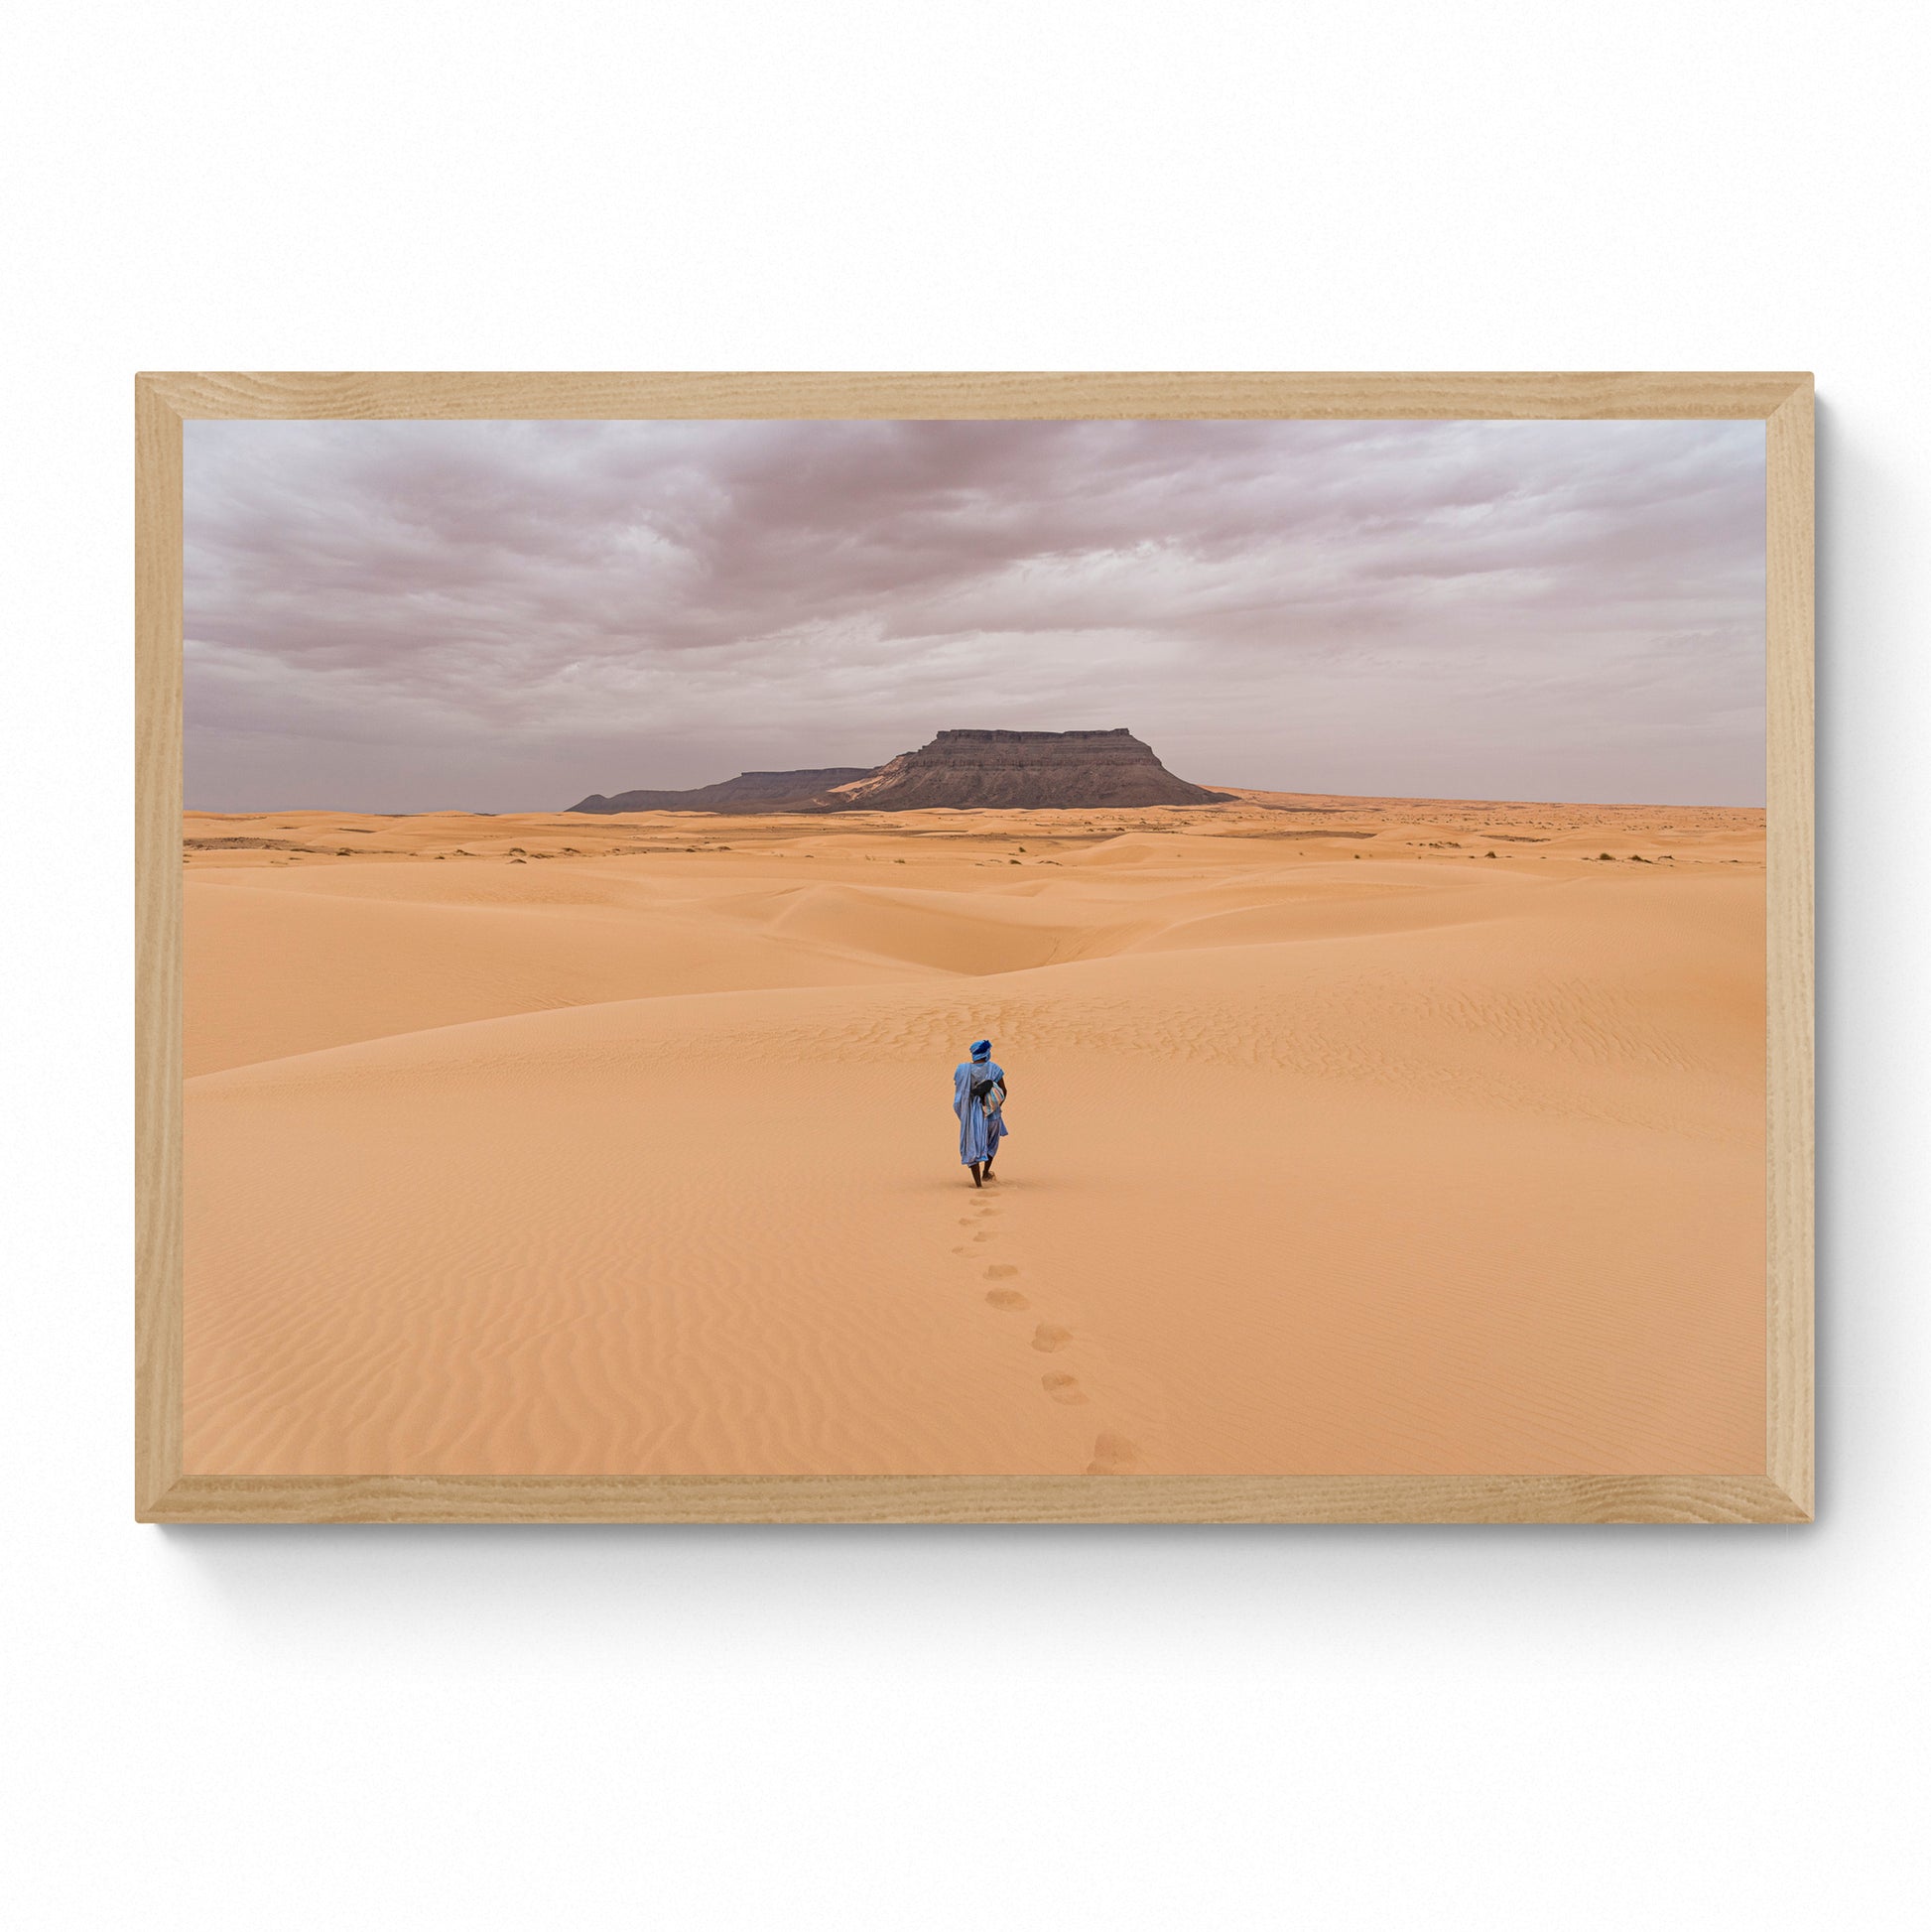 pictures of the sahara desert